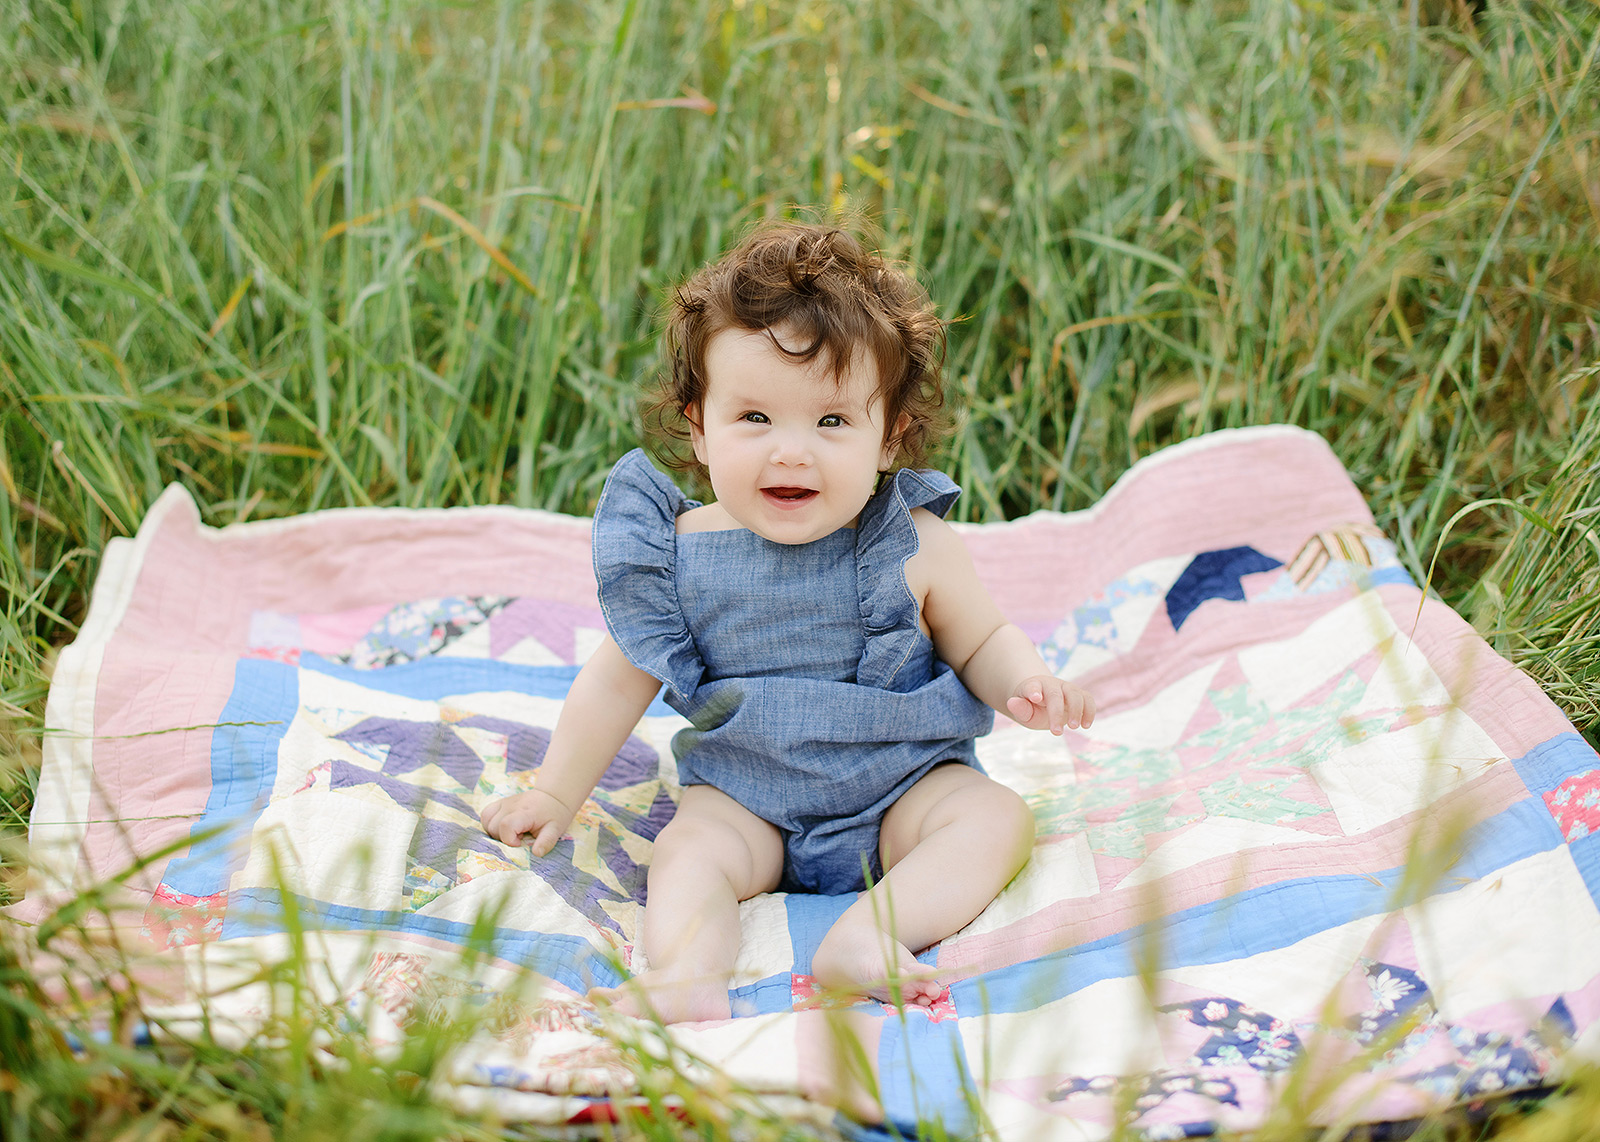 Baby on family heirloom quilt in the grass